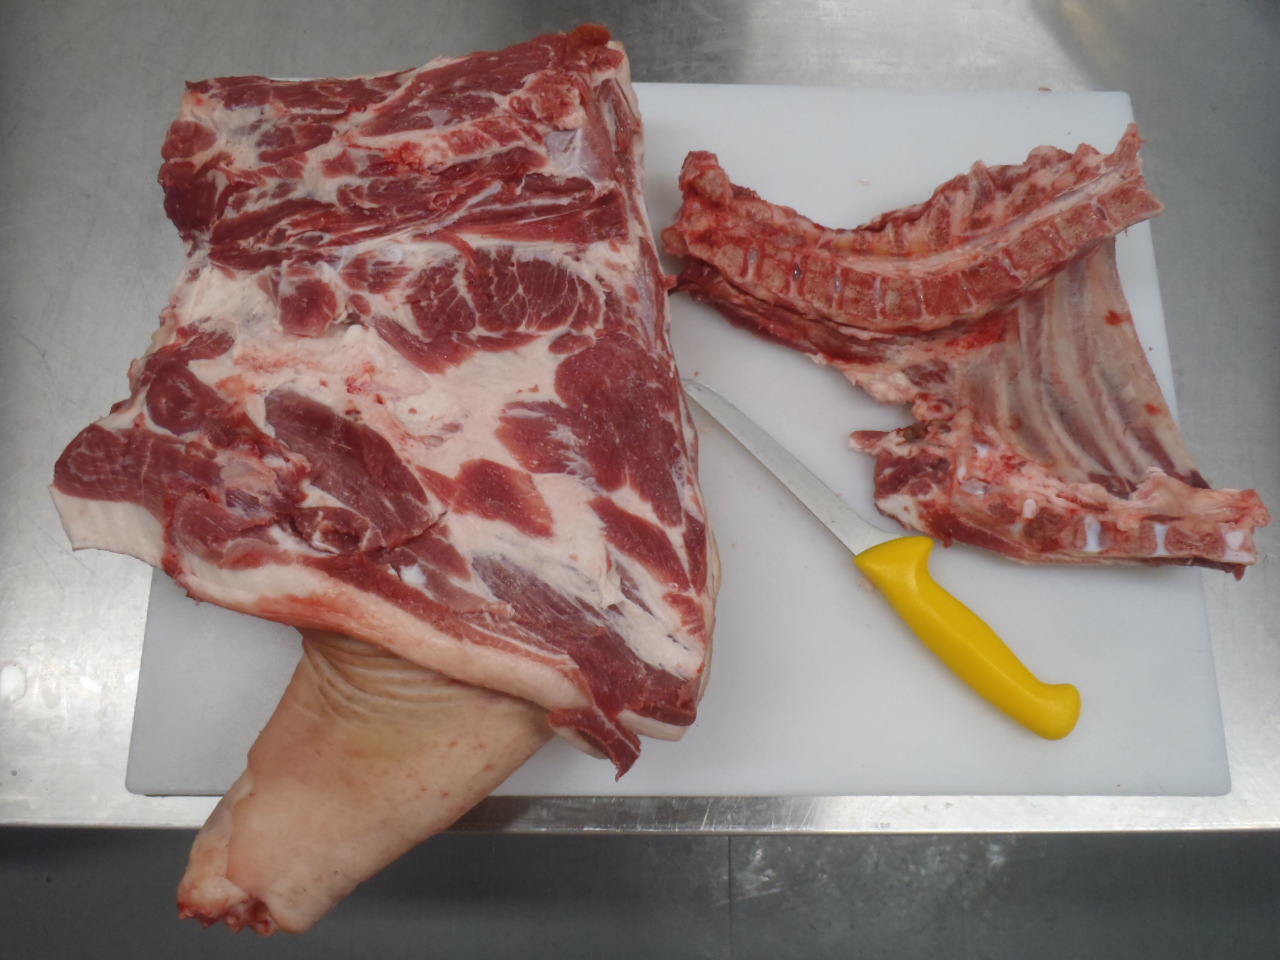 The neck bones and riblets, removed from the pork shoulder